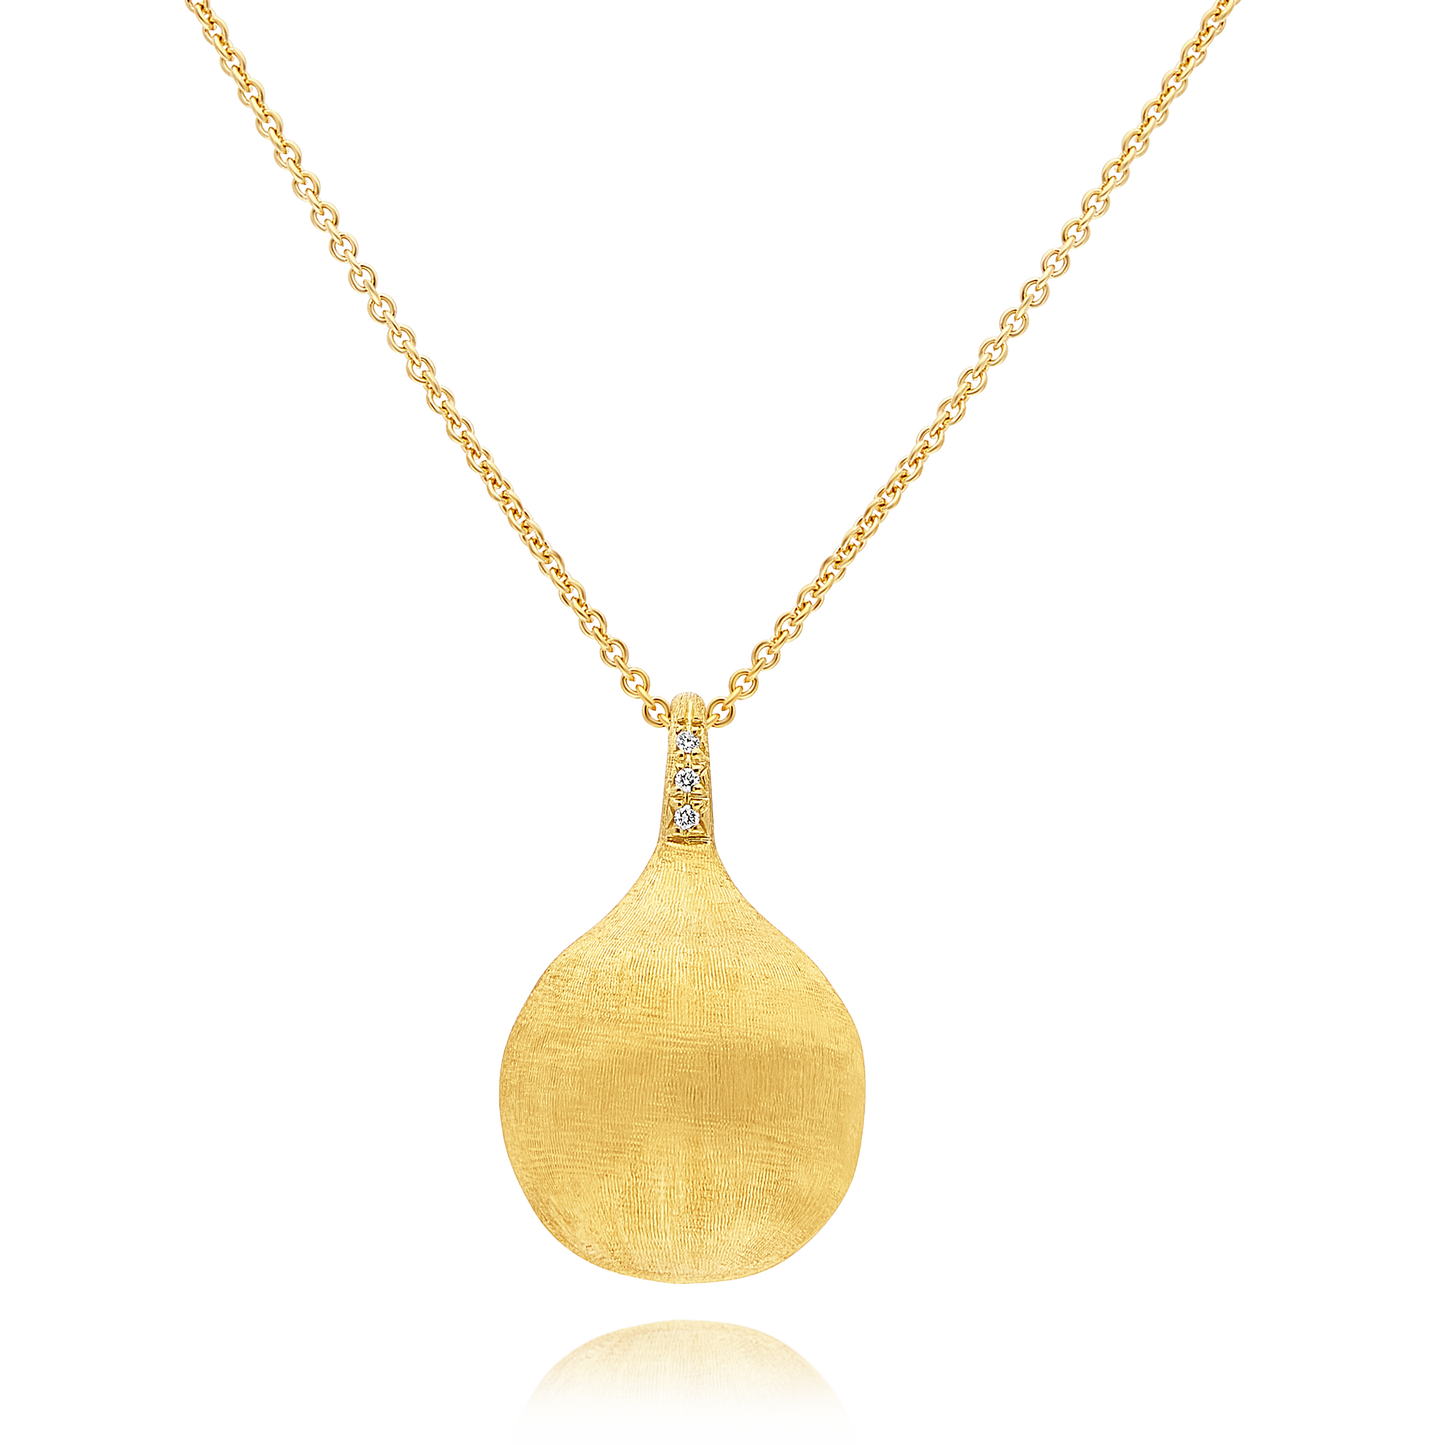 18ct Gold and Diamond "Africa" Pendant Long Chain Marco Bicego